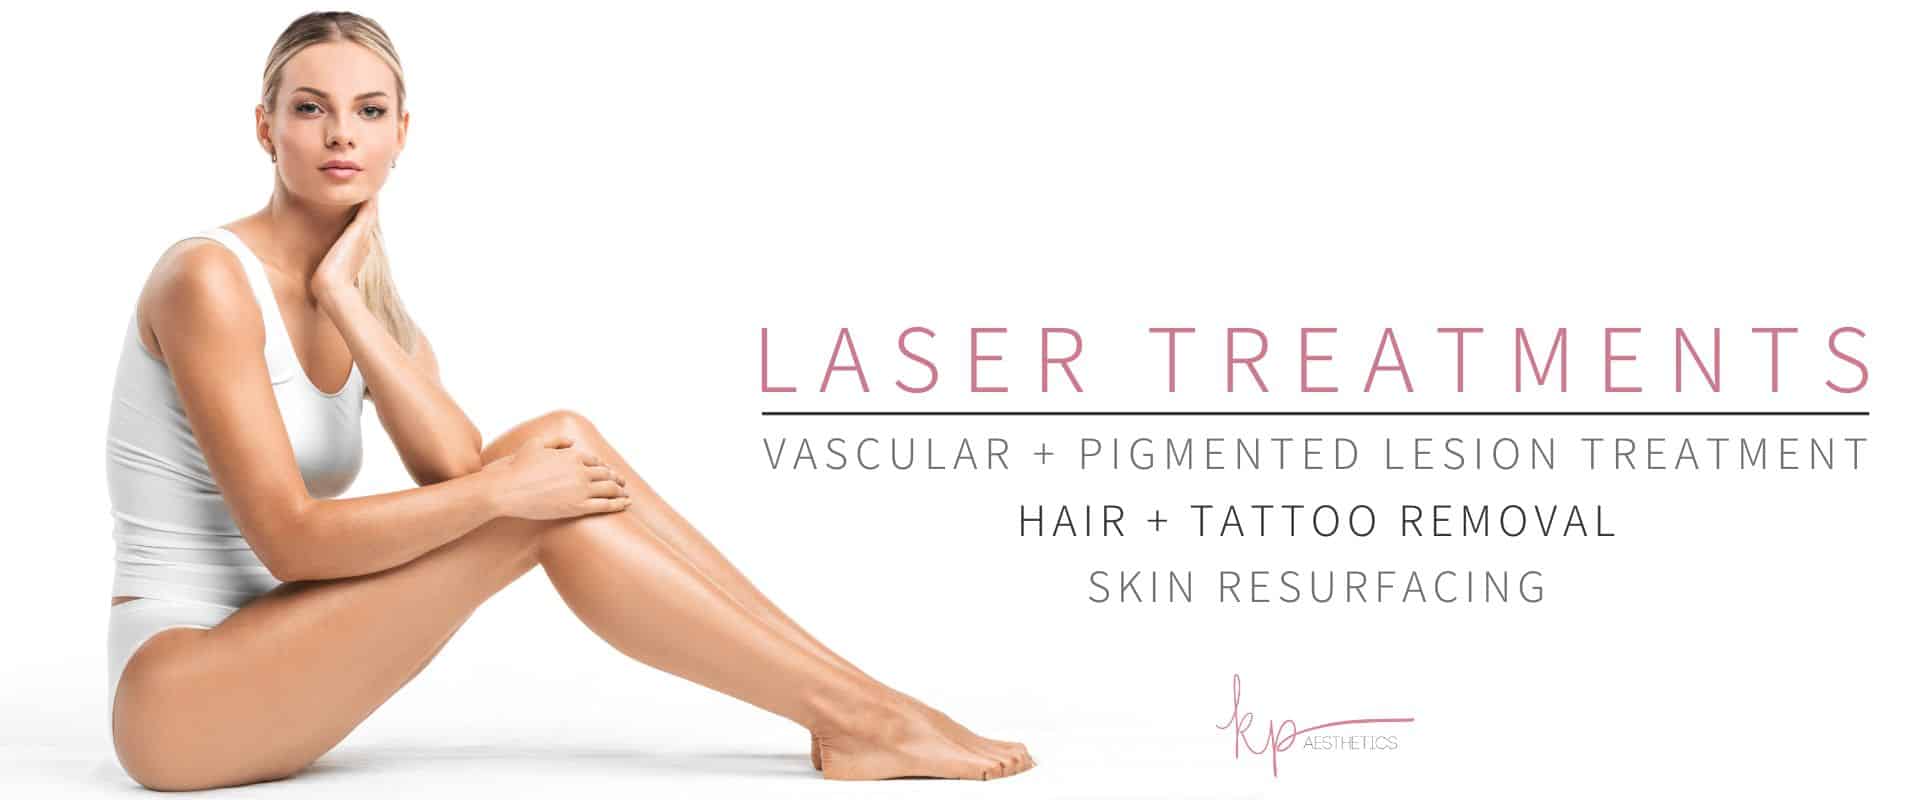 An attractive woman with flawless skin is promoting laser treatments available at KP Aesthetics in Newtown Square, PA.